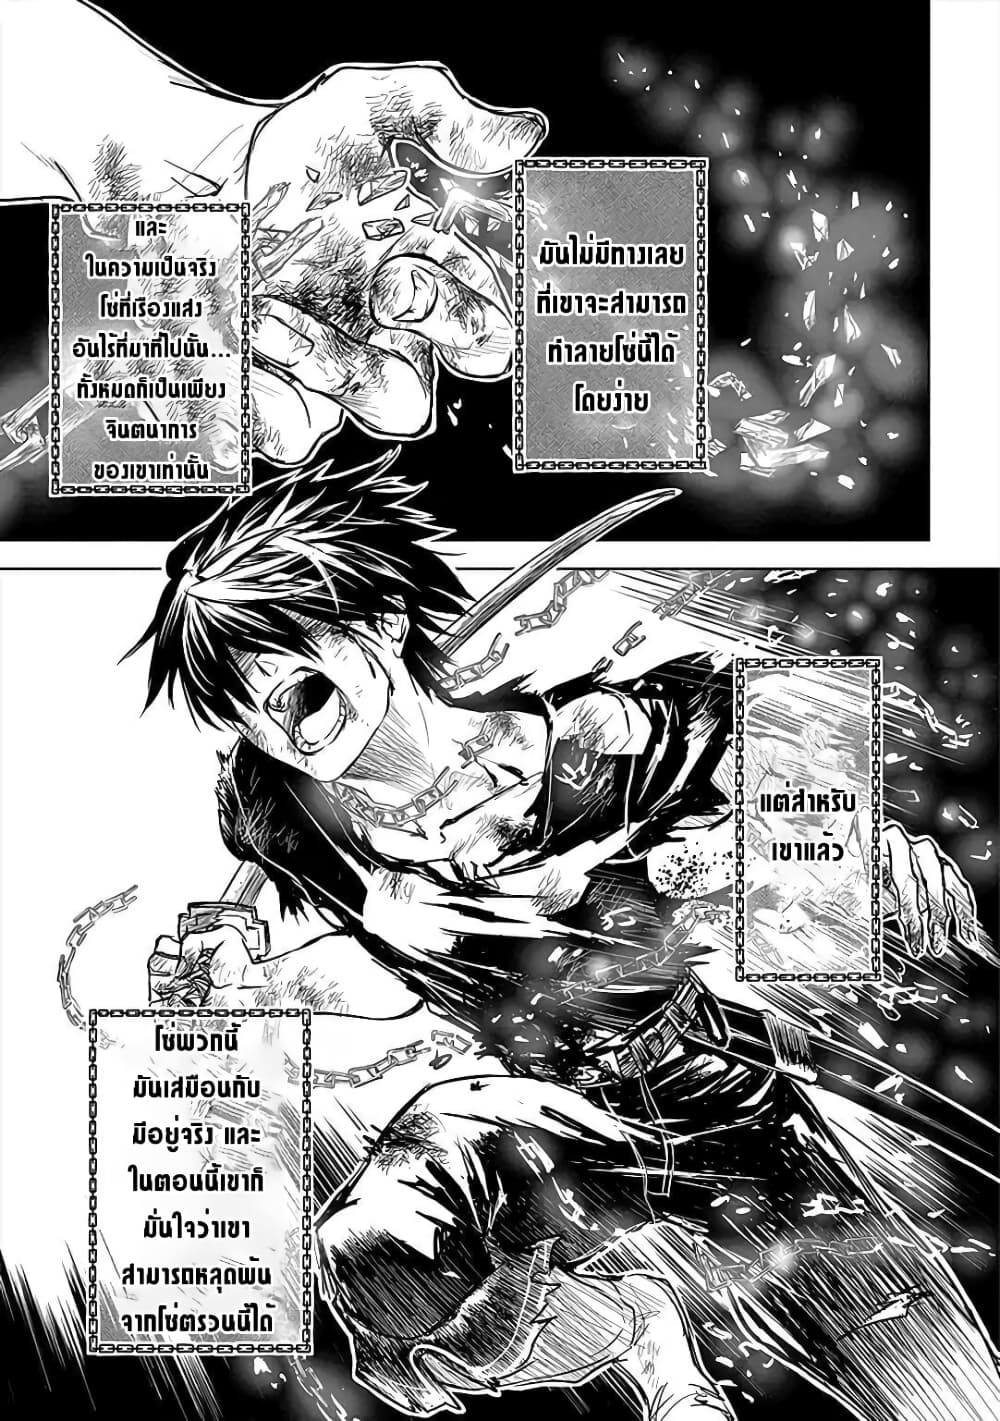 Ori of the Dragon Chain Heart in the Mind 8 (2)